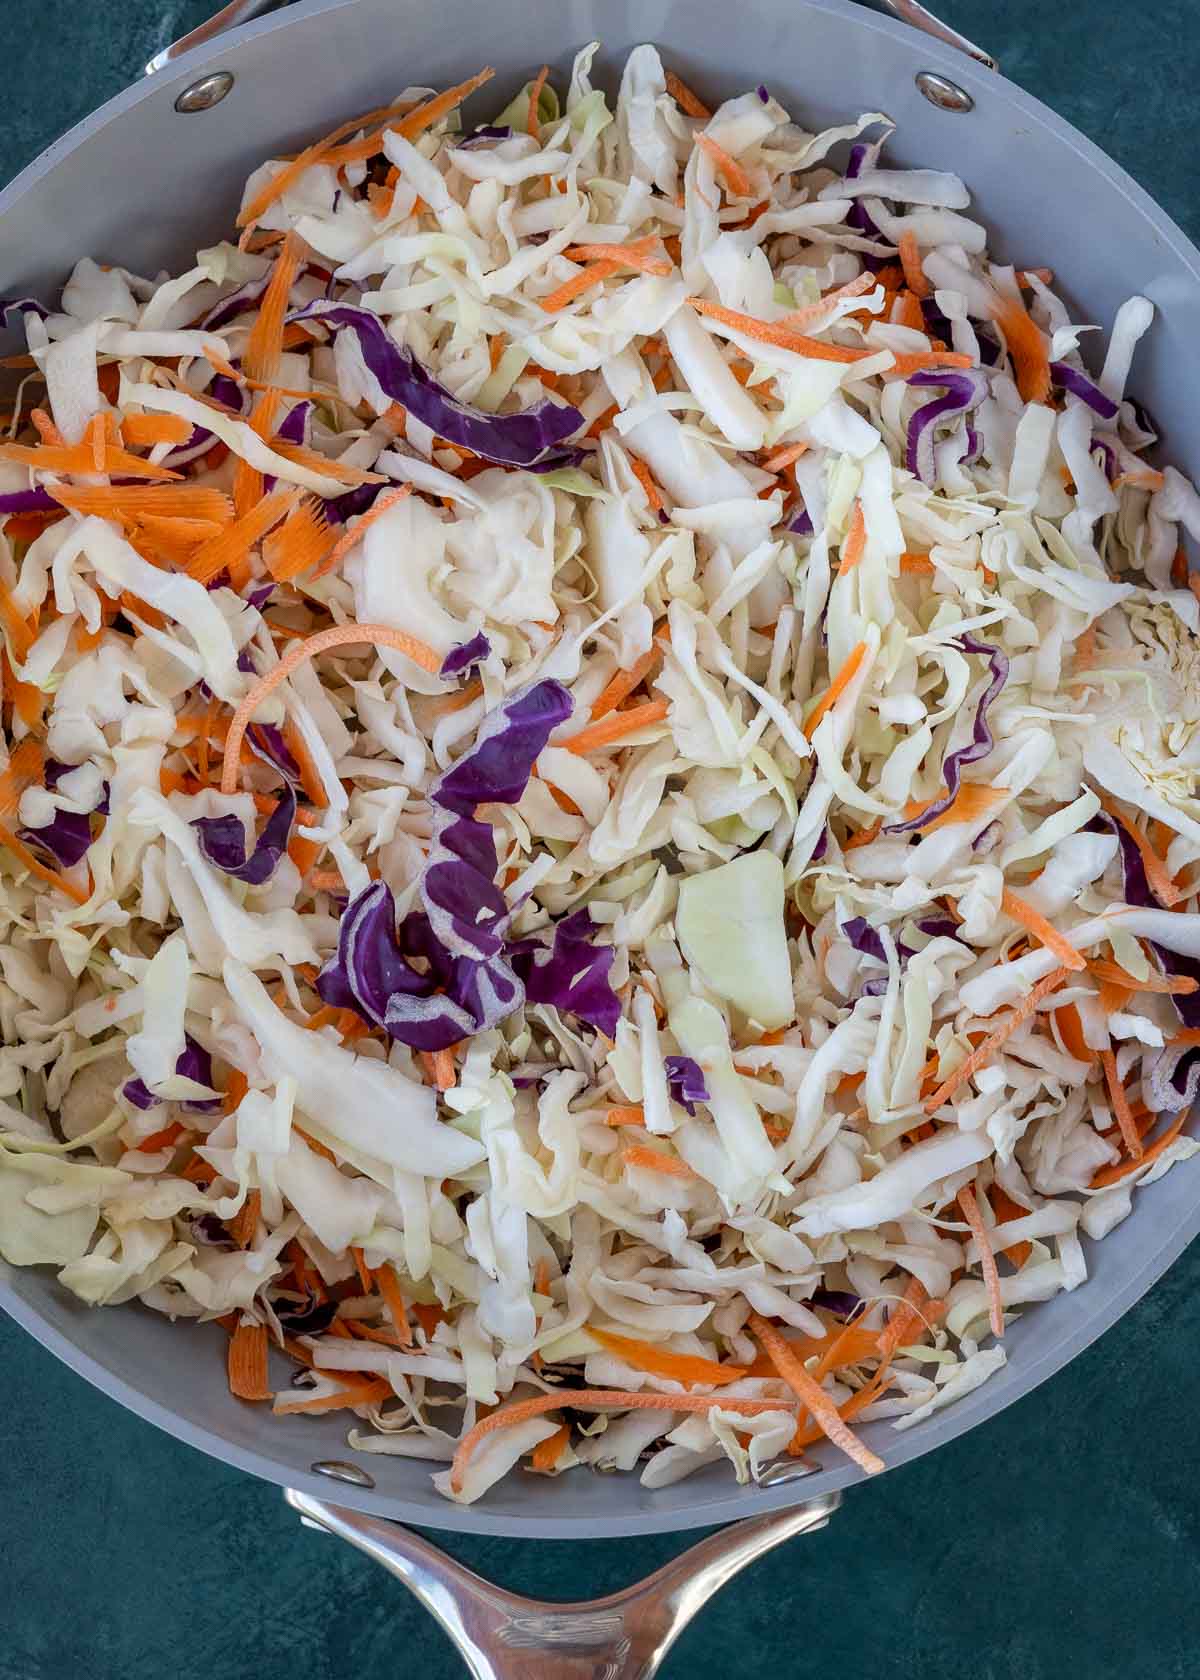 A frying pan filled with cabbage and carrots